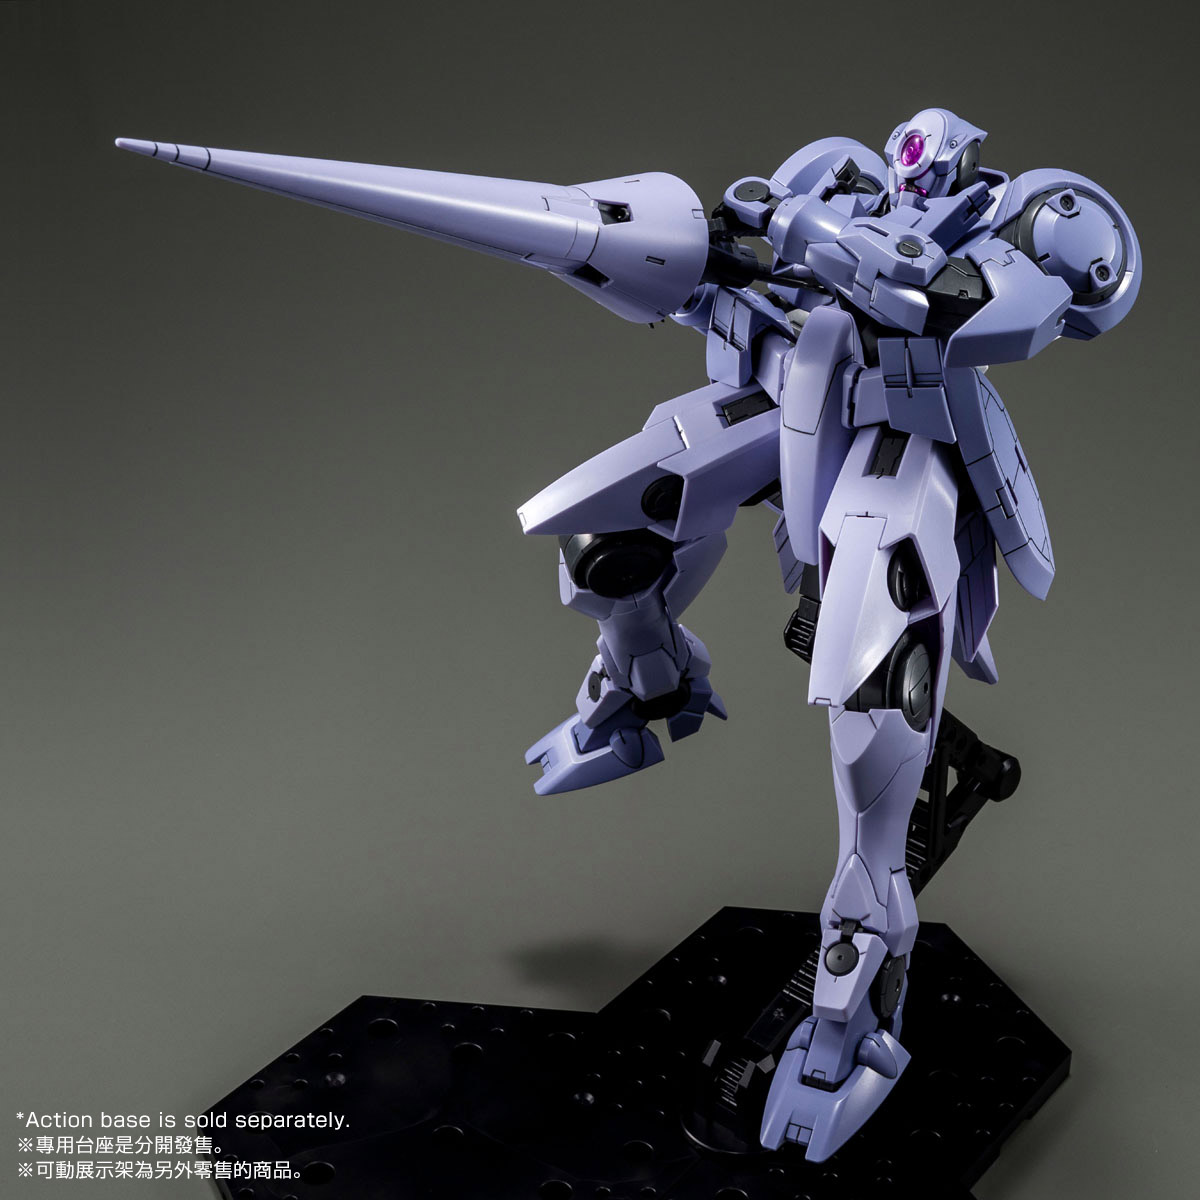 Mg 1 100 Gn X Iii Esf Colors February 19 Delivery Gundam Premium Bandai Singapore Online Store For Action Figures Model Kits Toys And More